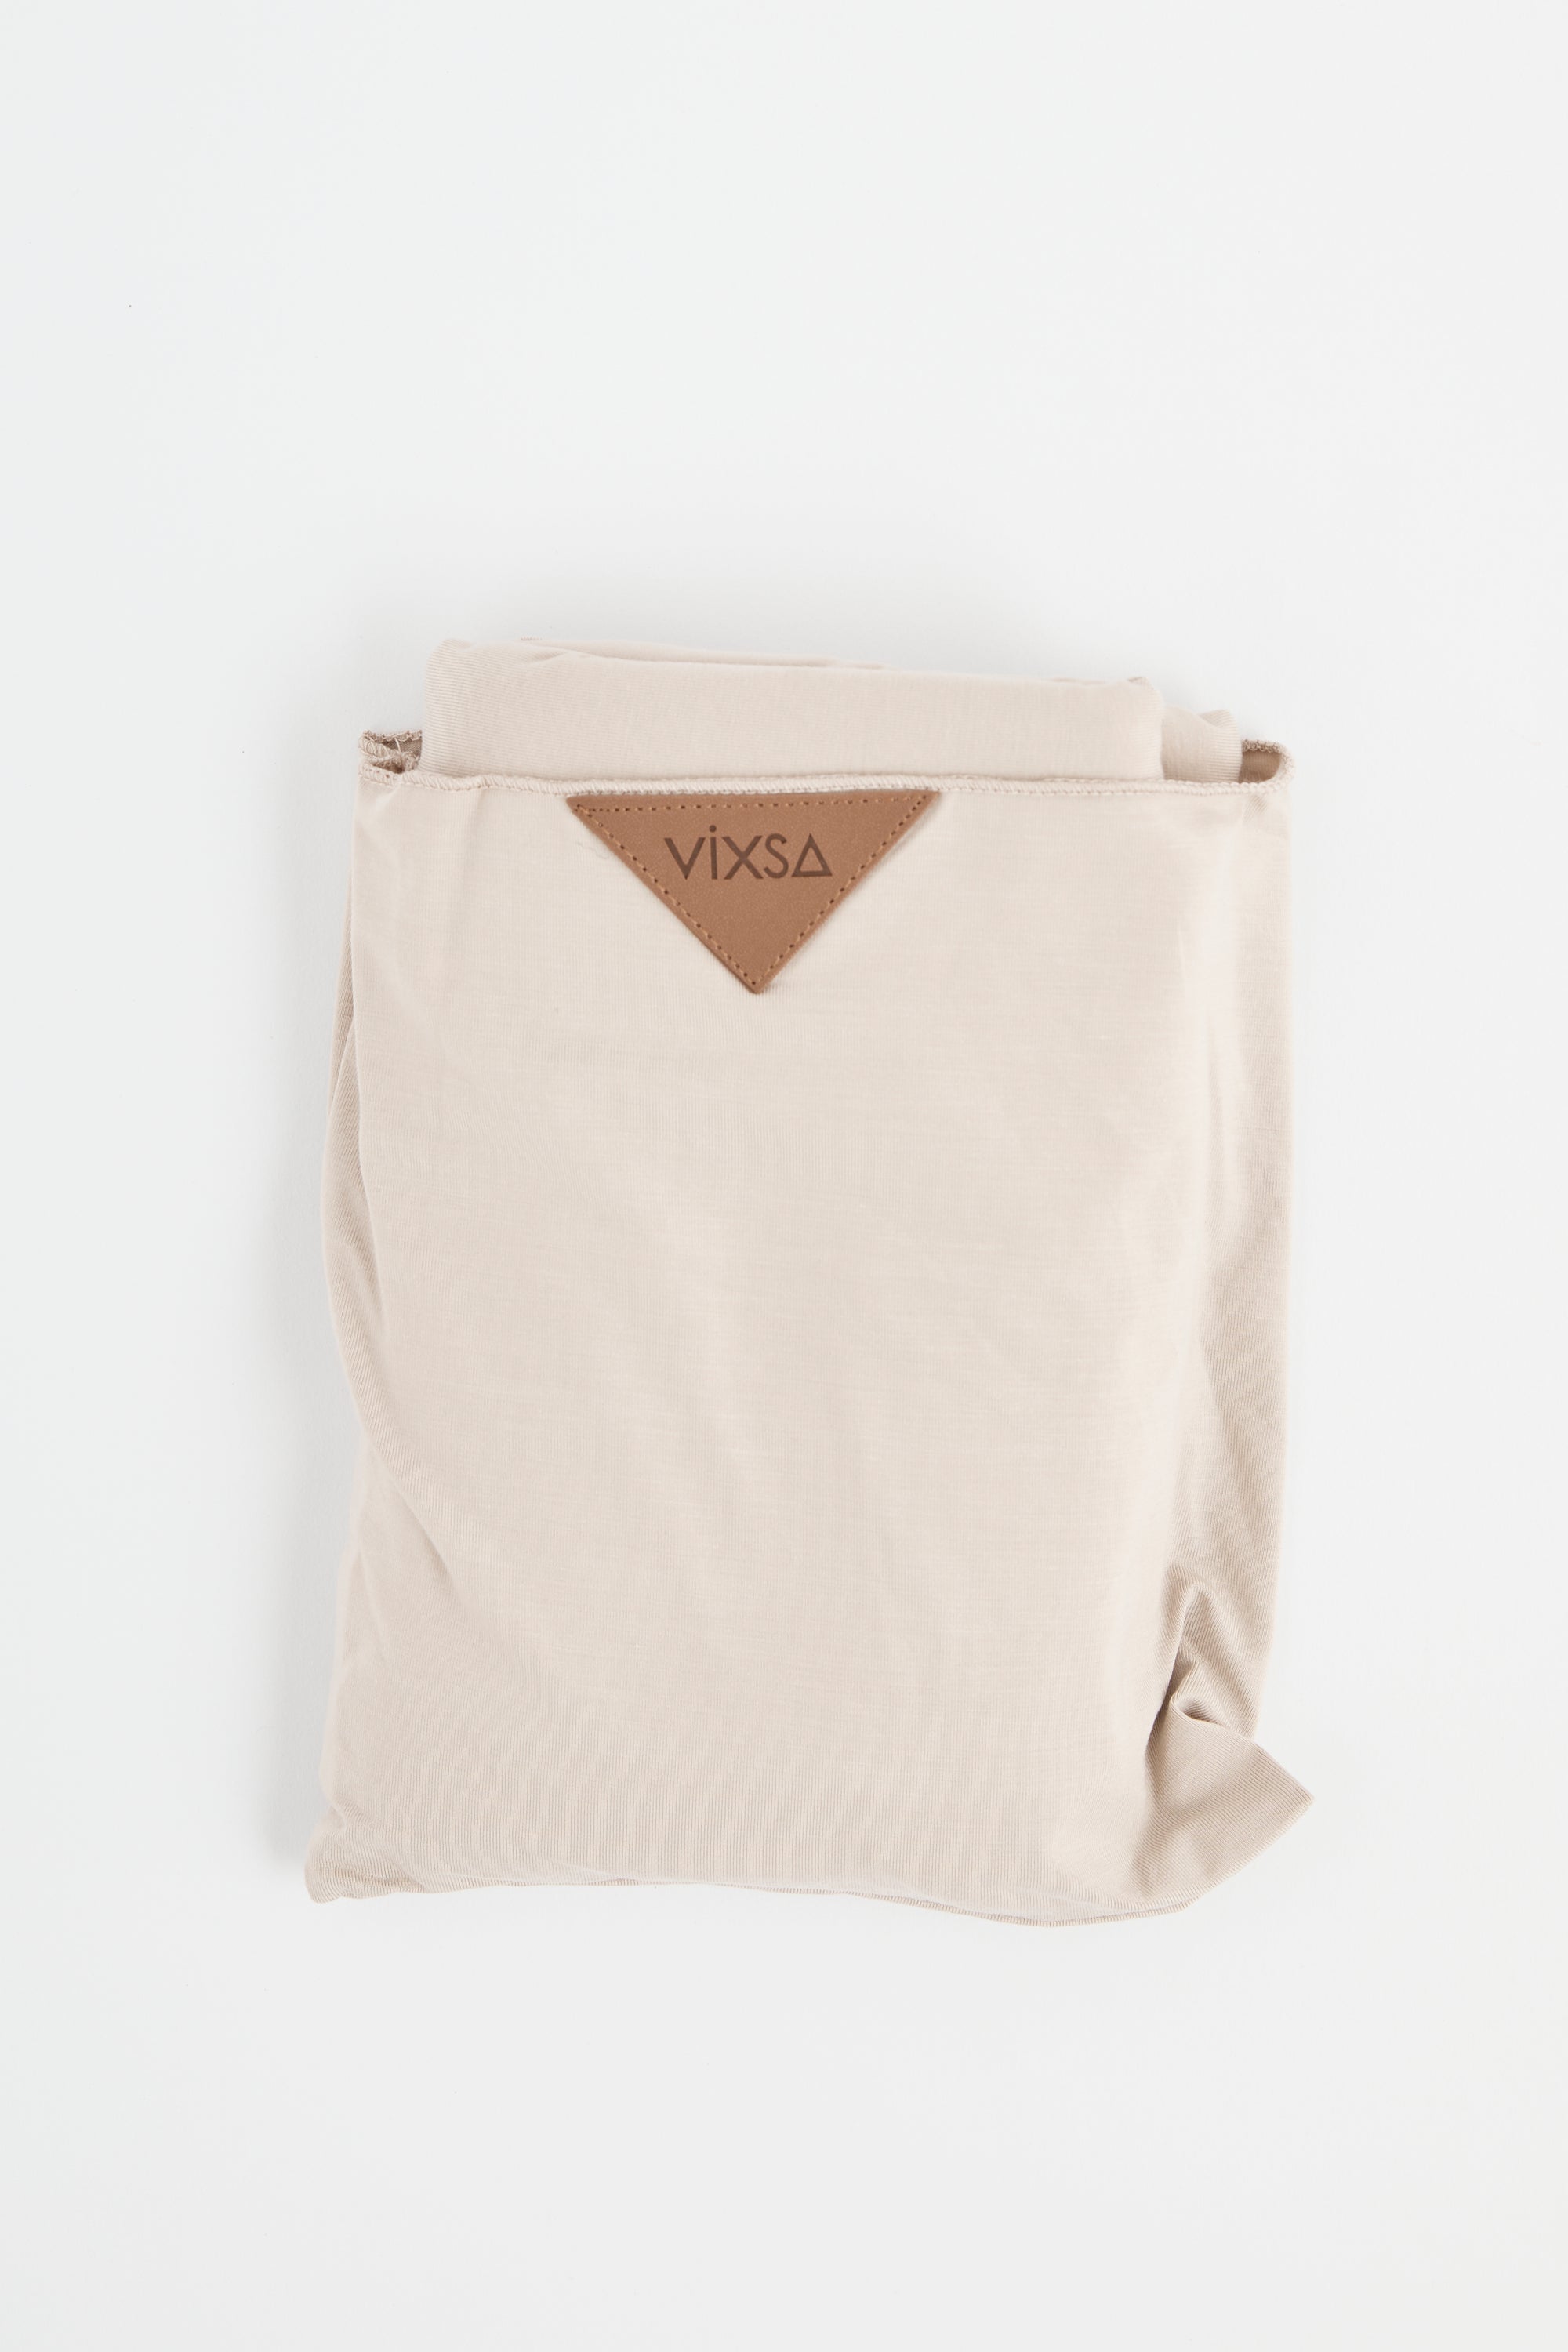 Wrap Carrier - Taupe